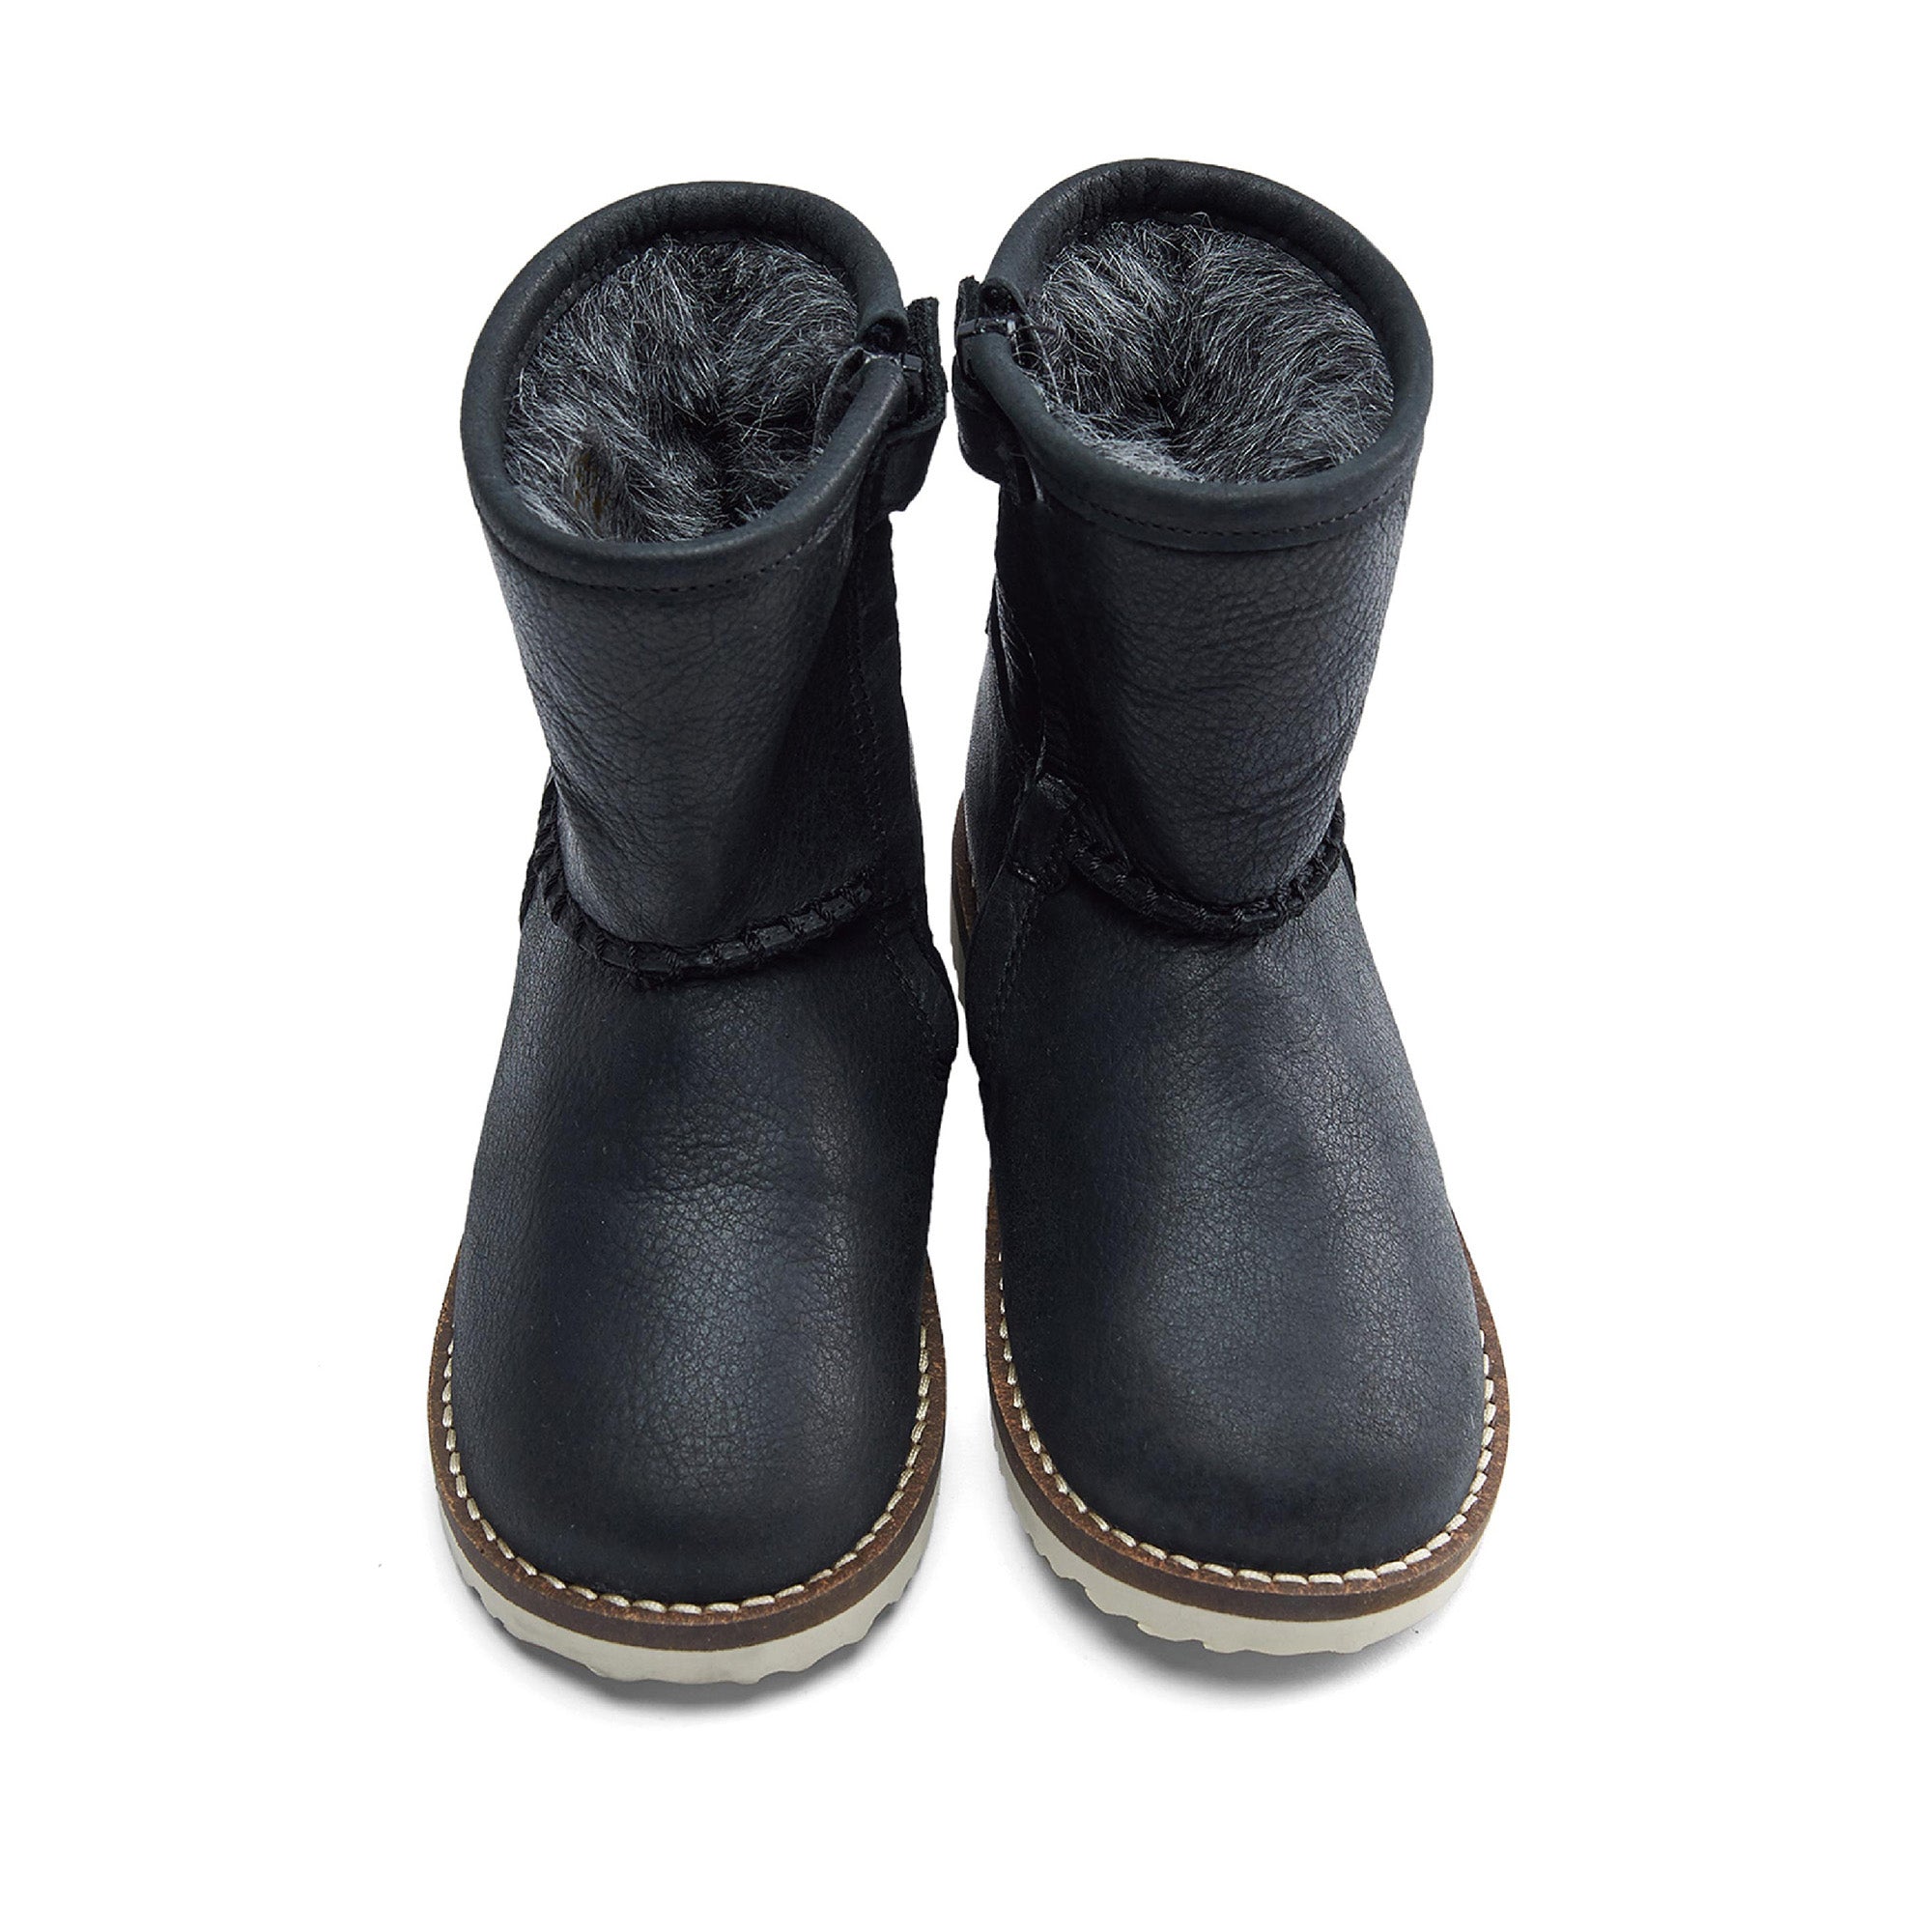 Boys & Girls Black Leather Tall Canister Shoes